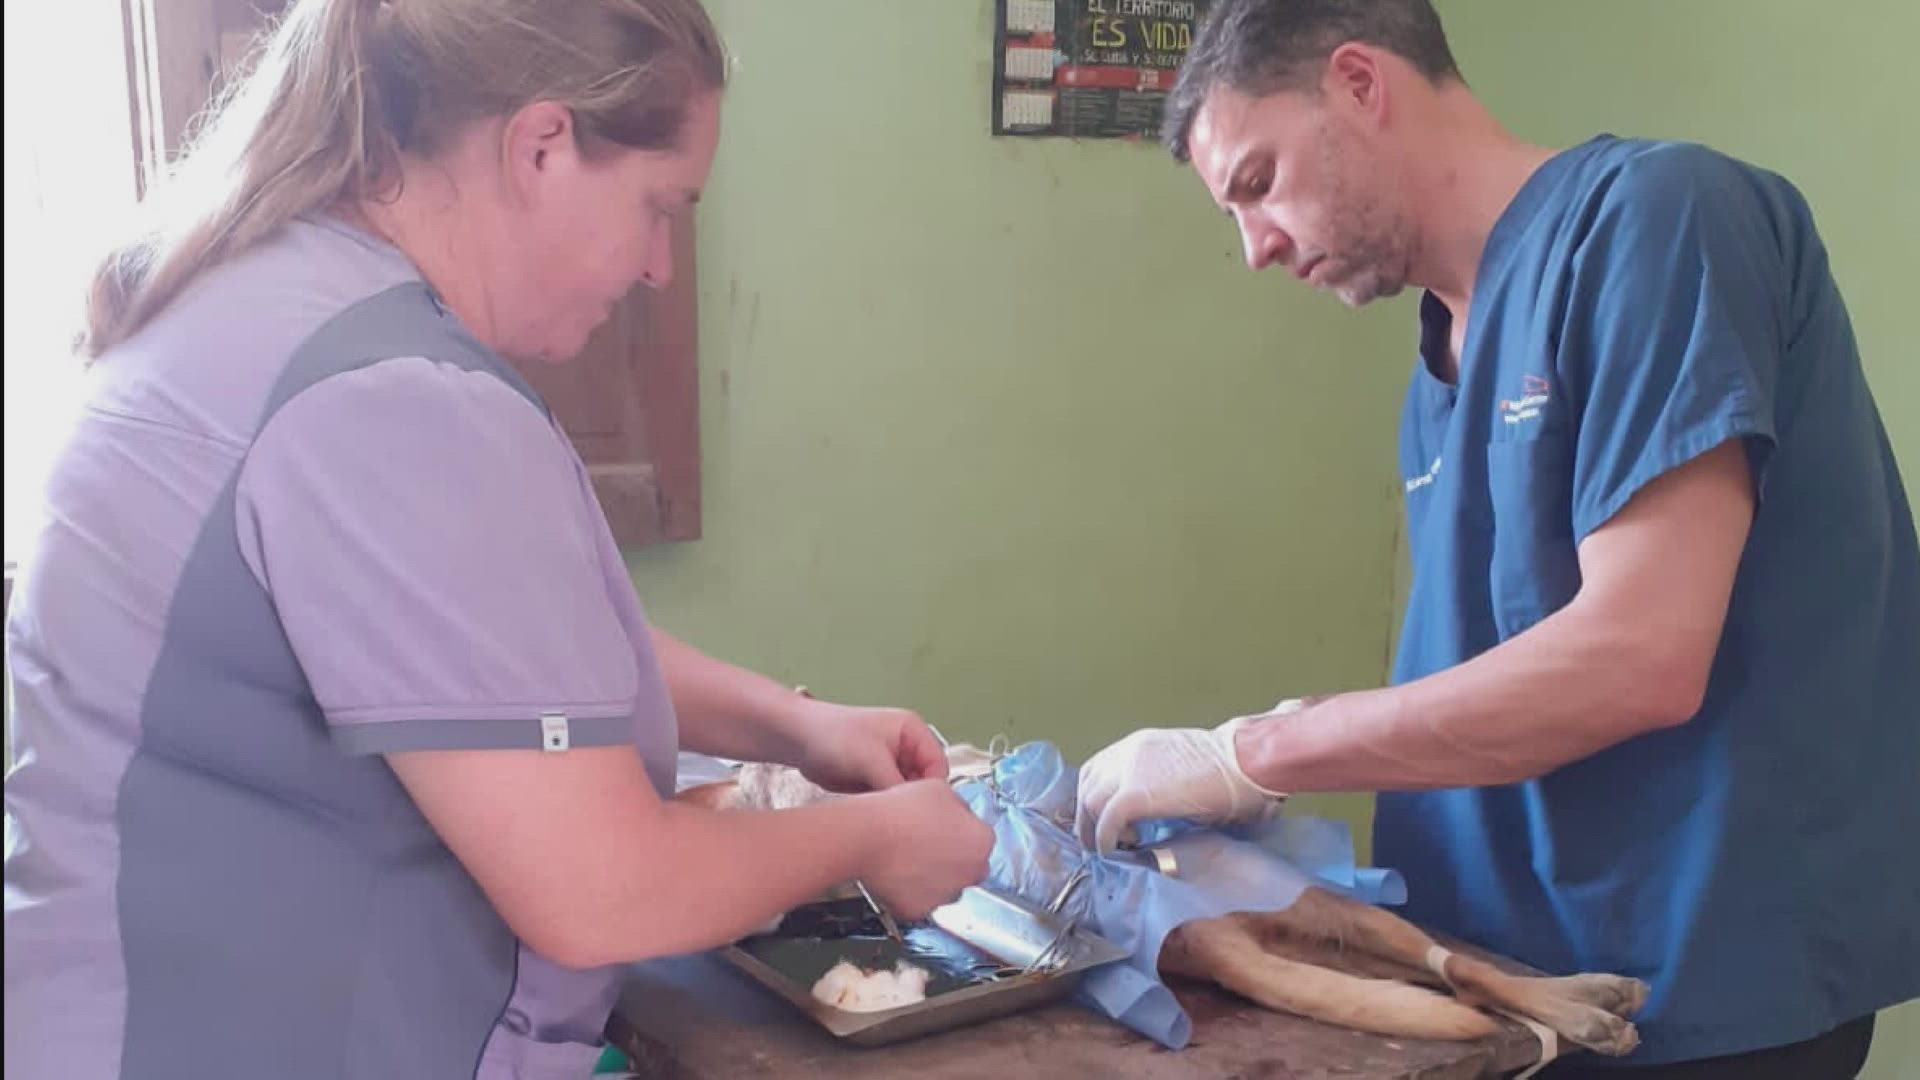 Dr. Ricardo Videla, Large Animal Veterinarian at the UT College of Veterinary Medicine, is leading a team to help animals in Argentina. July 5, 2022-4pm.